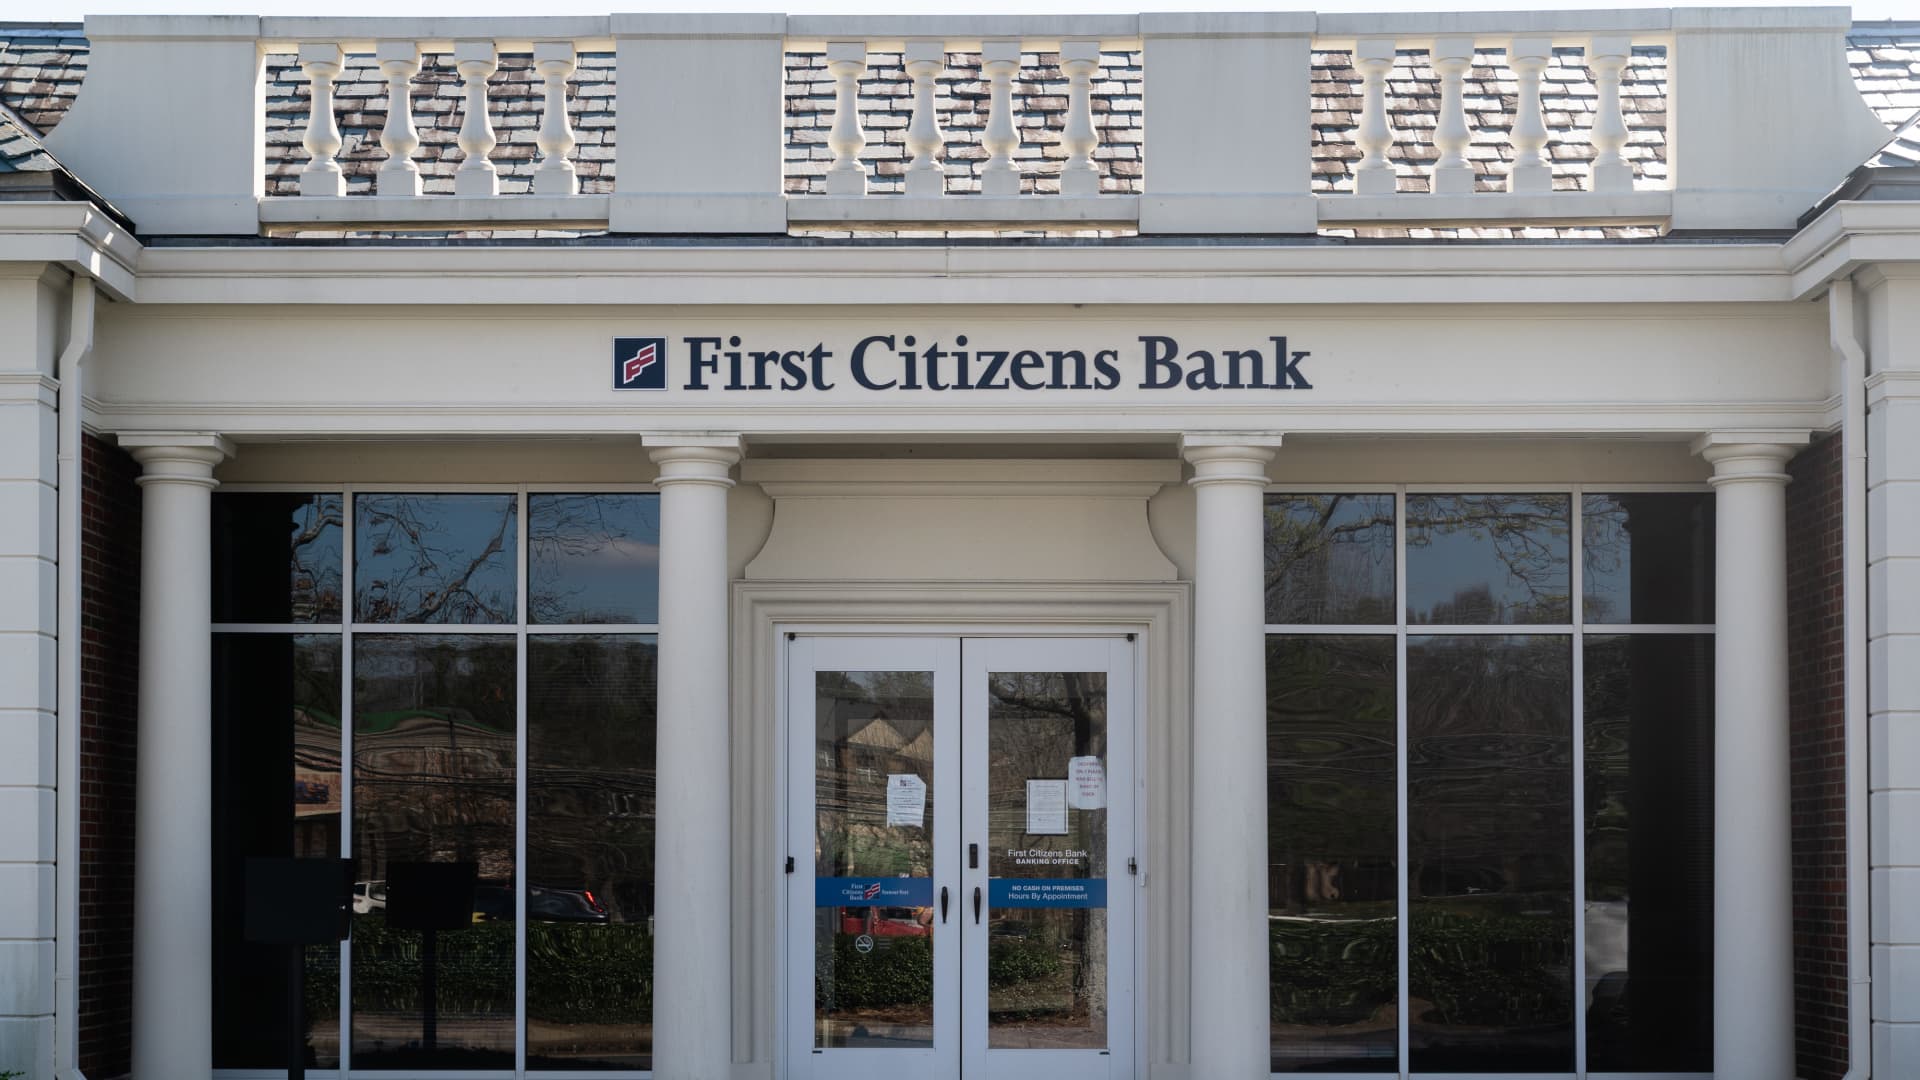 107215326 1679897023892 gettyimages 1249261678 FIRST CITIZENS BANK -